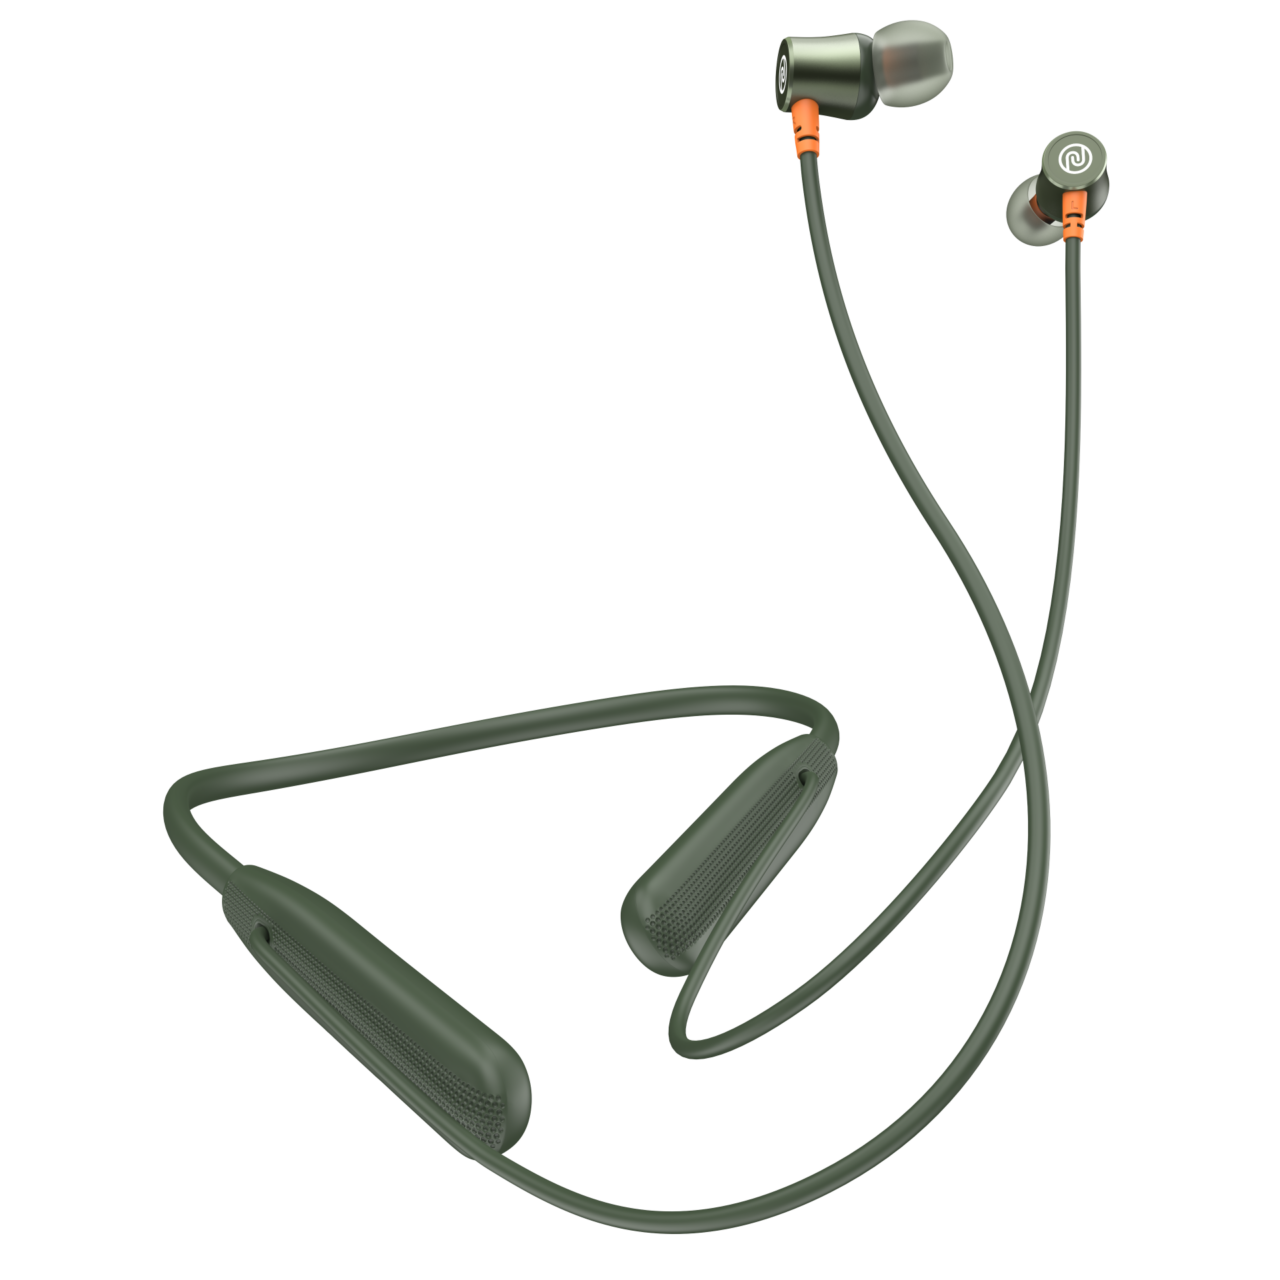 New Noise Airwave Neckband Earphones Launched with 50-Hour Battery Life